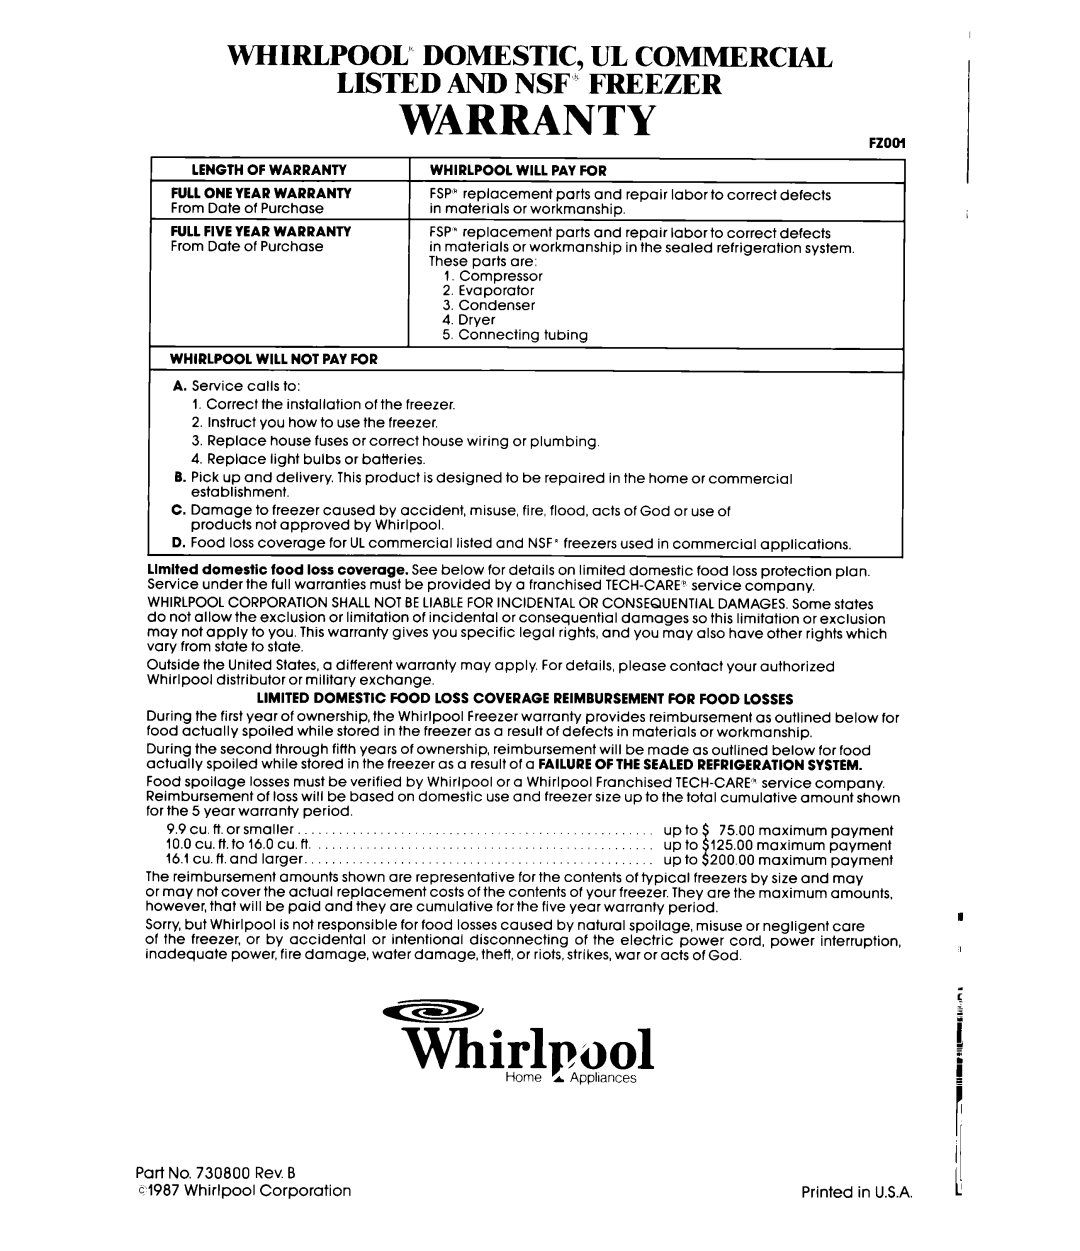 Whirlpool EH150C manual Thpuol, Warranty, Whirlpool” Domestic, Ul Commercial, Listed And Nsf”” Freezer 